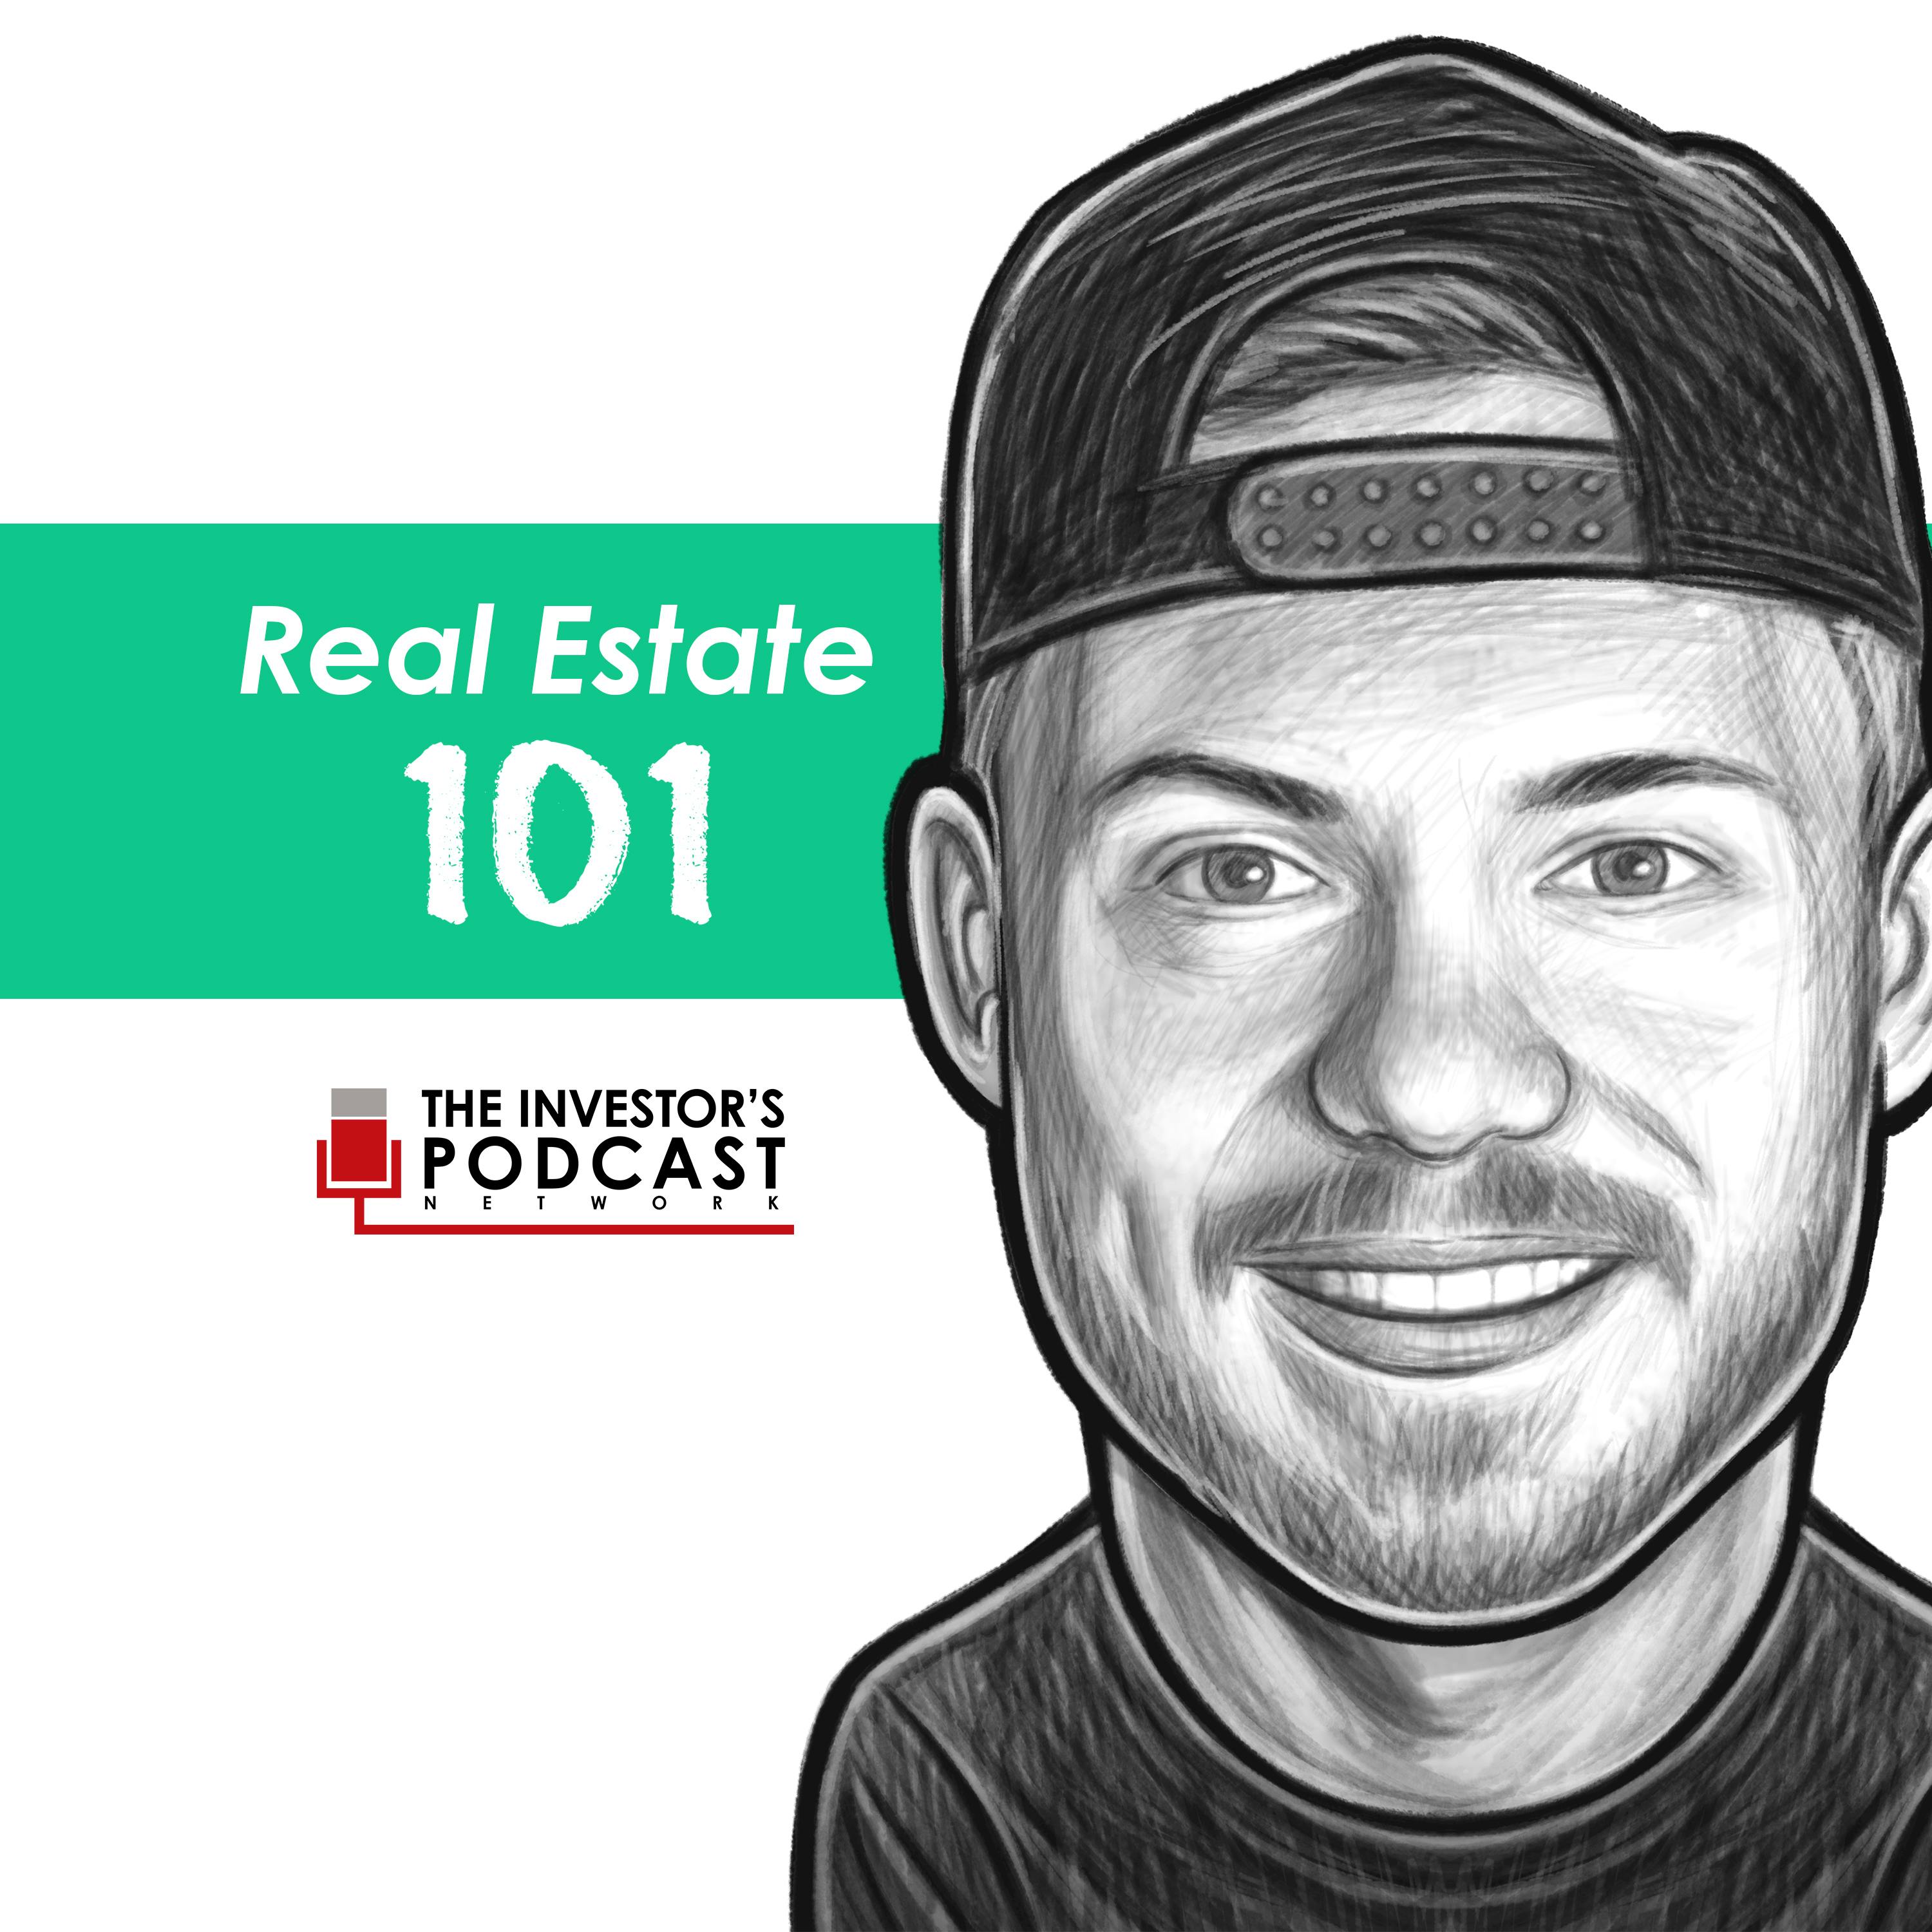 REI024: From Beginner to 107 Units through Networking with Kyle Marcotte